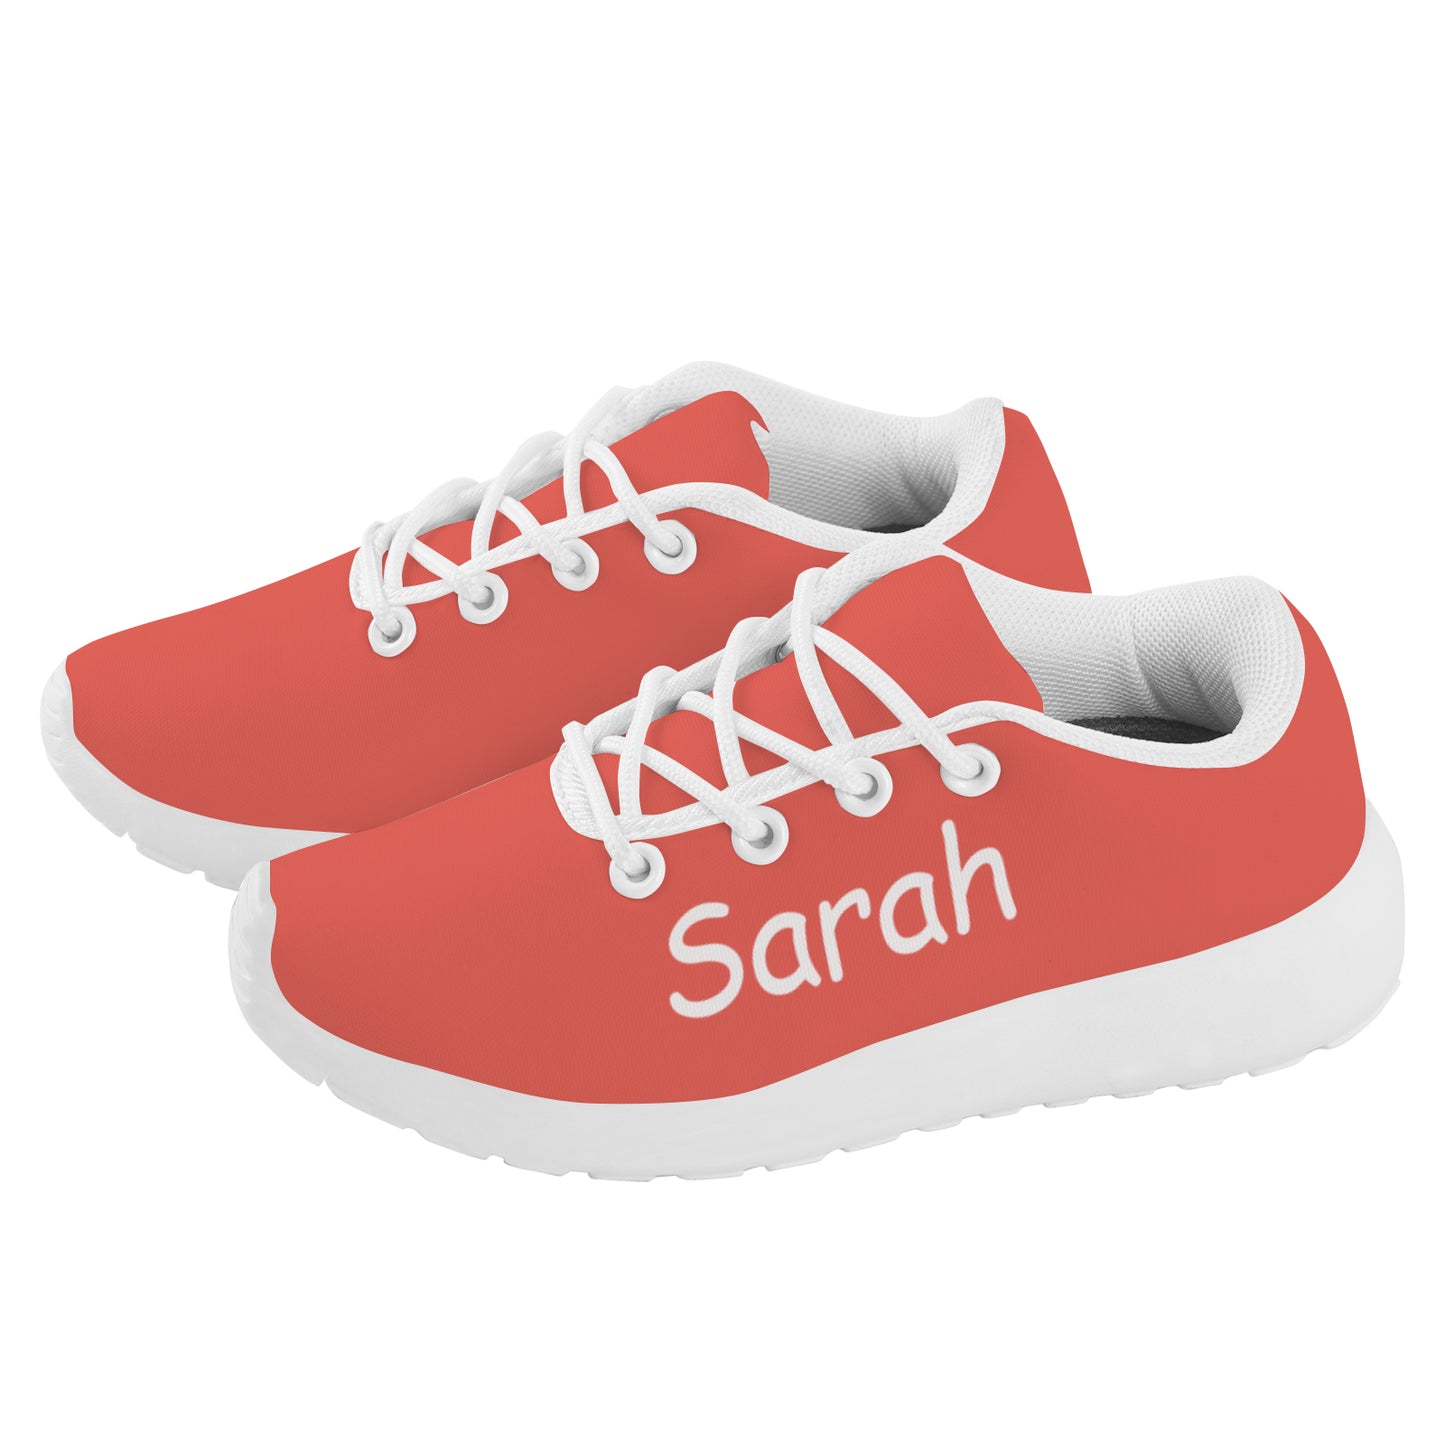 Kid's Sneakers - Classic Pink (Personalized)